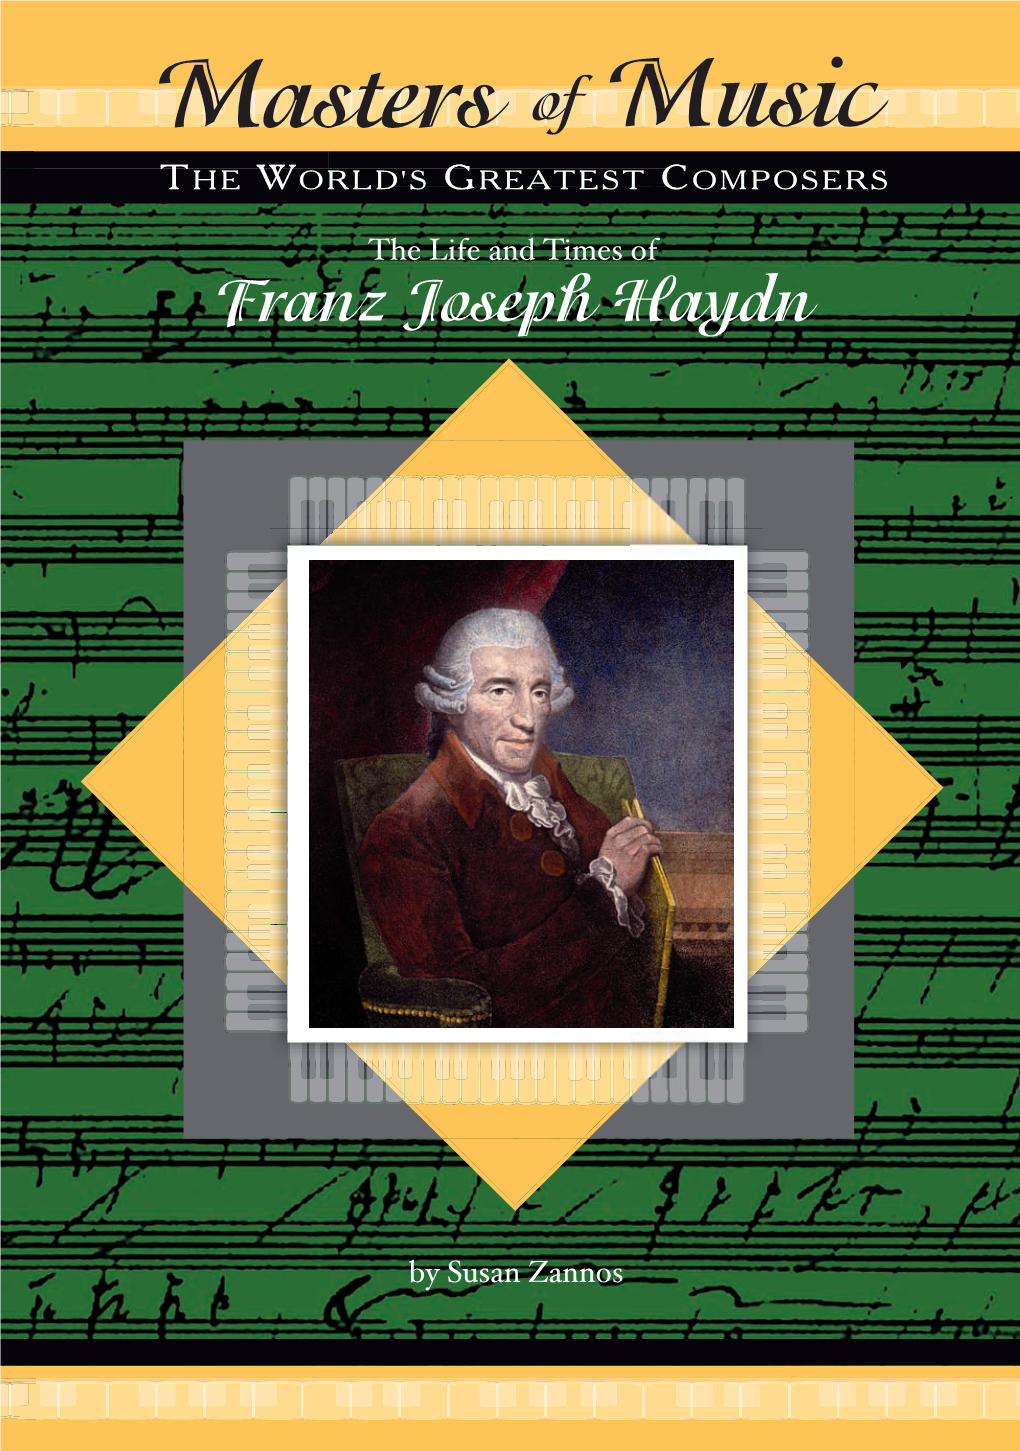 Franz Joseph Haydn’S Importance in the History Franz Joseph Haydn of Music Is So Great, That It Would Be Difficult to Summarize His Achievements in a Few Para- Graphs